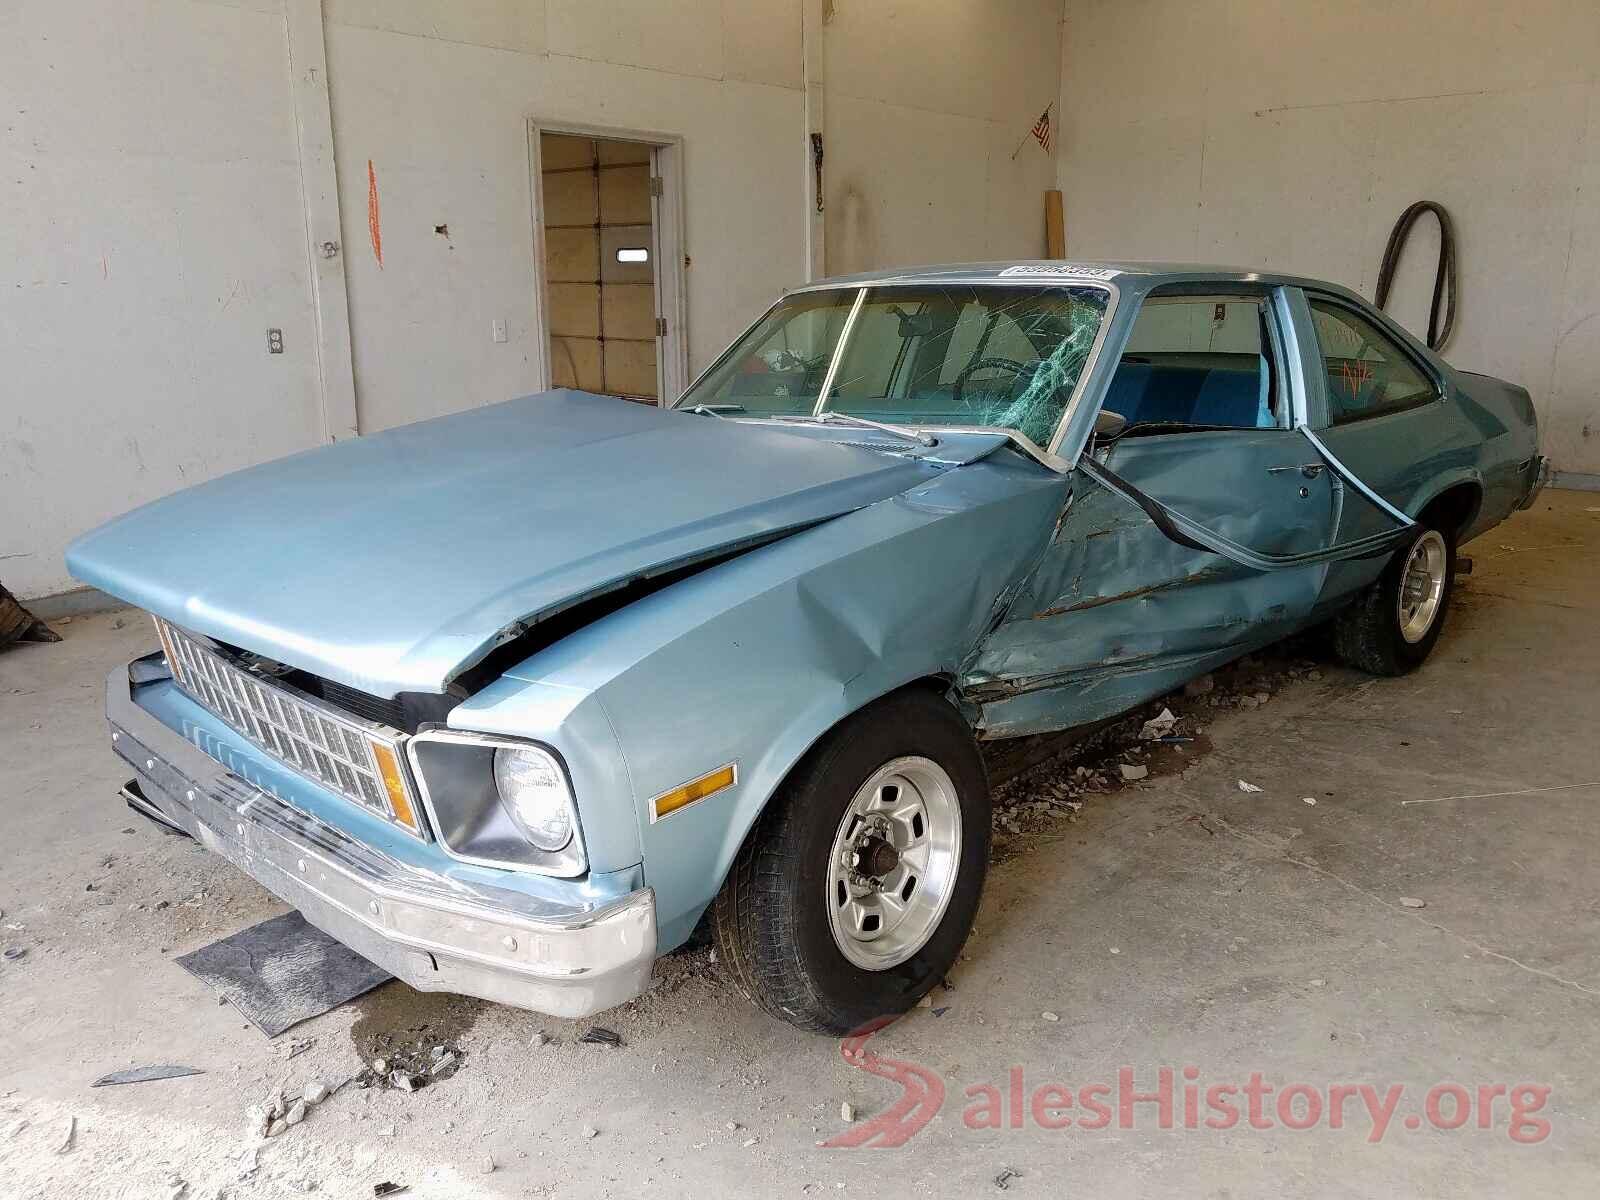 1X27D8T110250 1978 CHEVROLET ALL OTHER